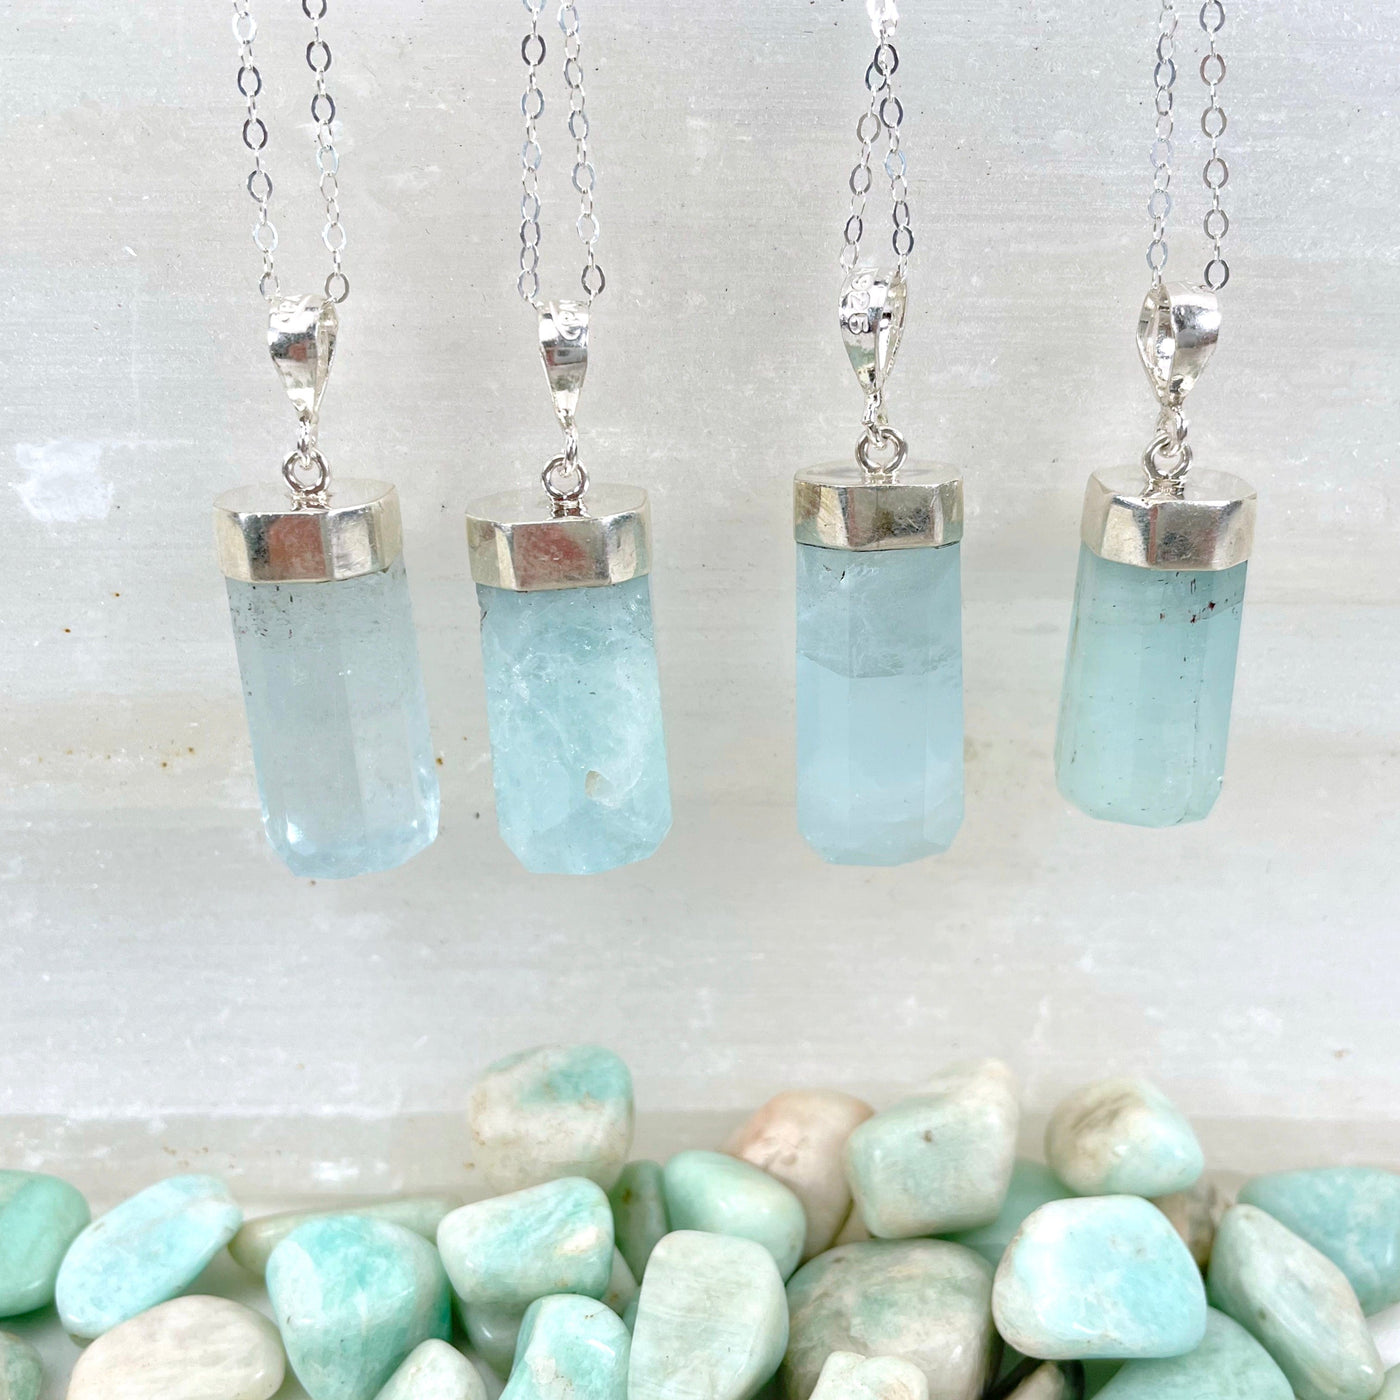 close up of aquamarine pendant necklaces hanging on display for details